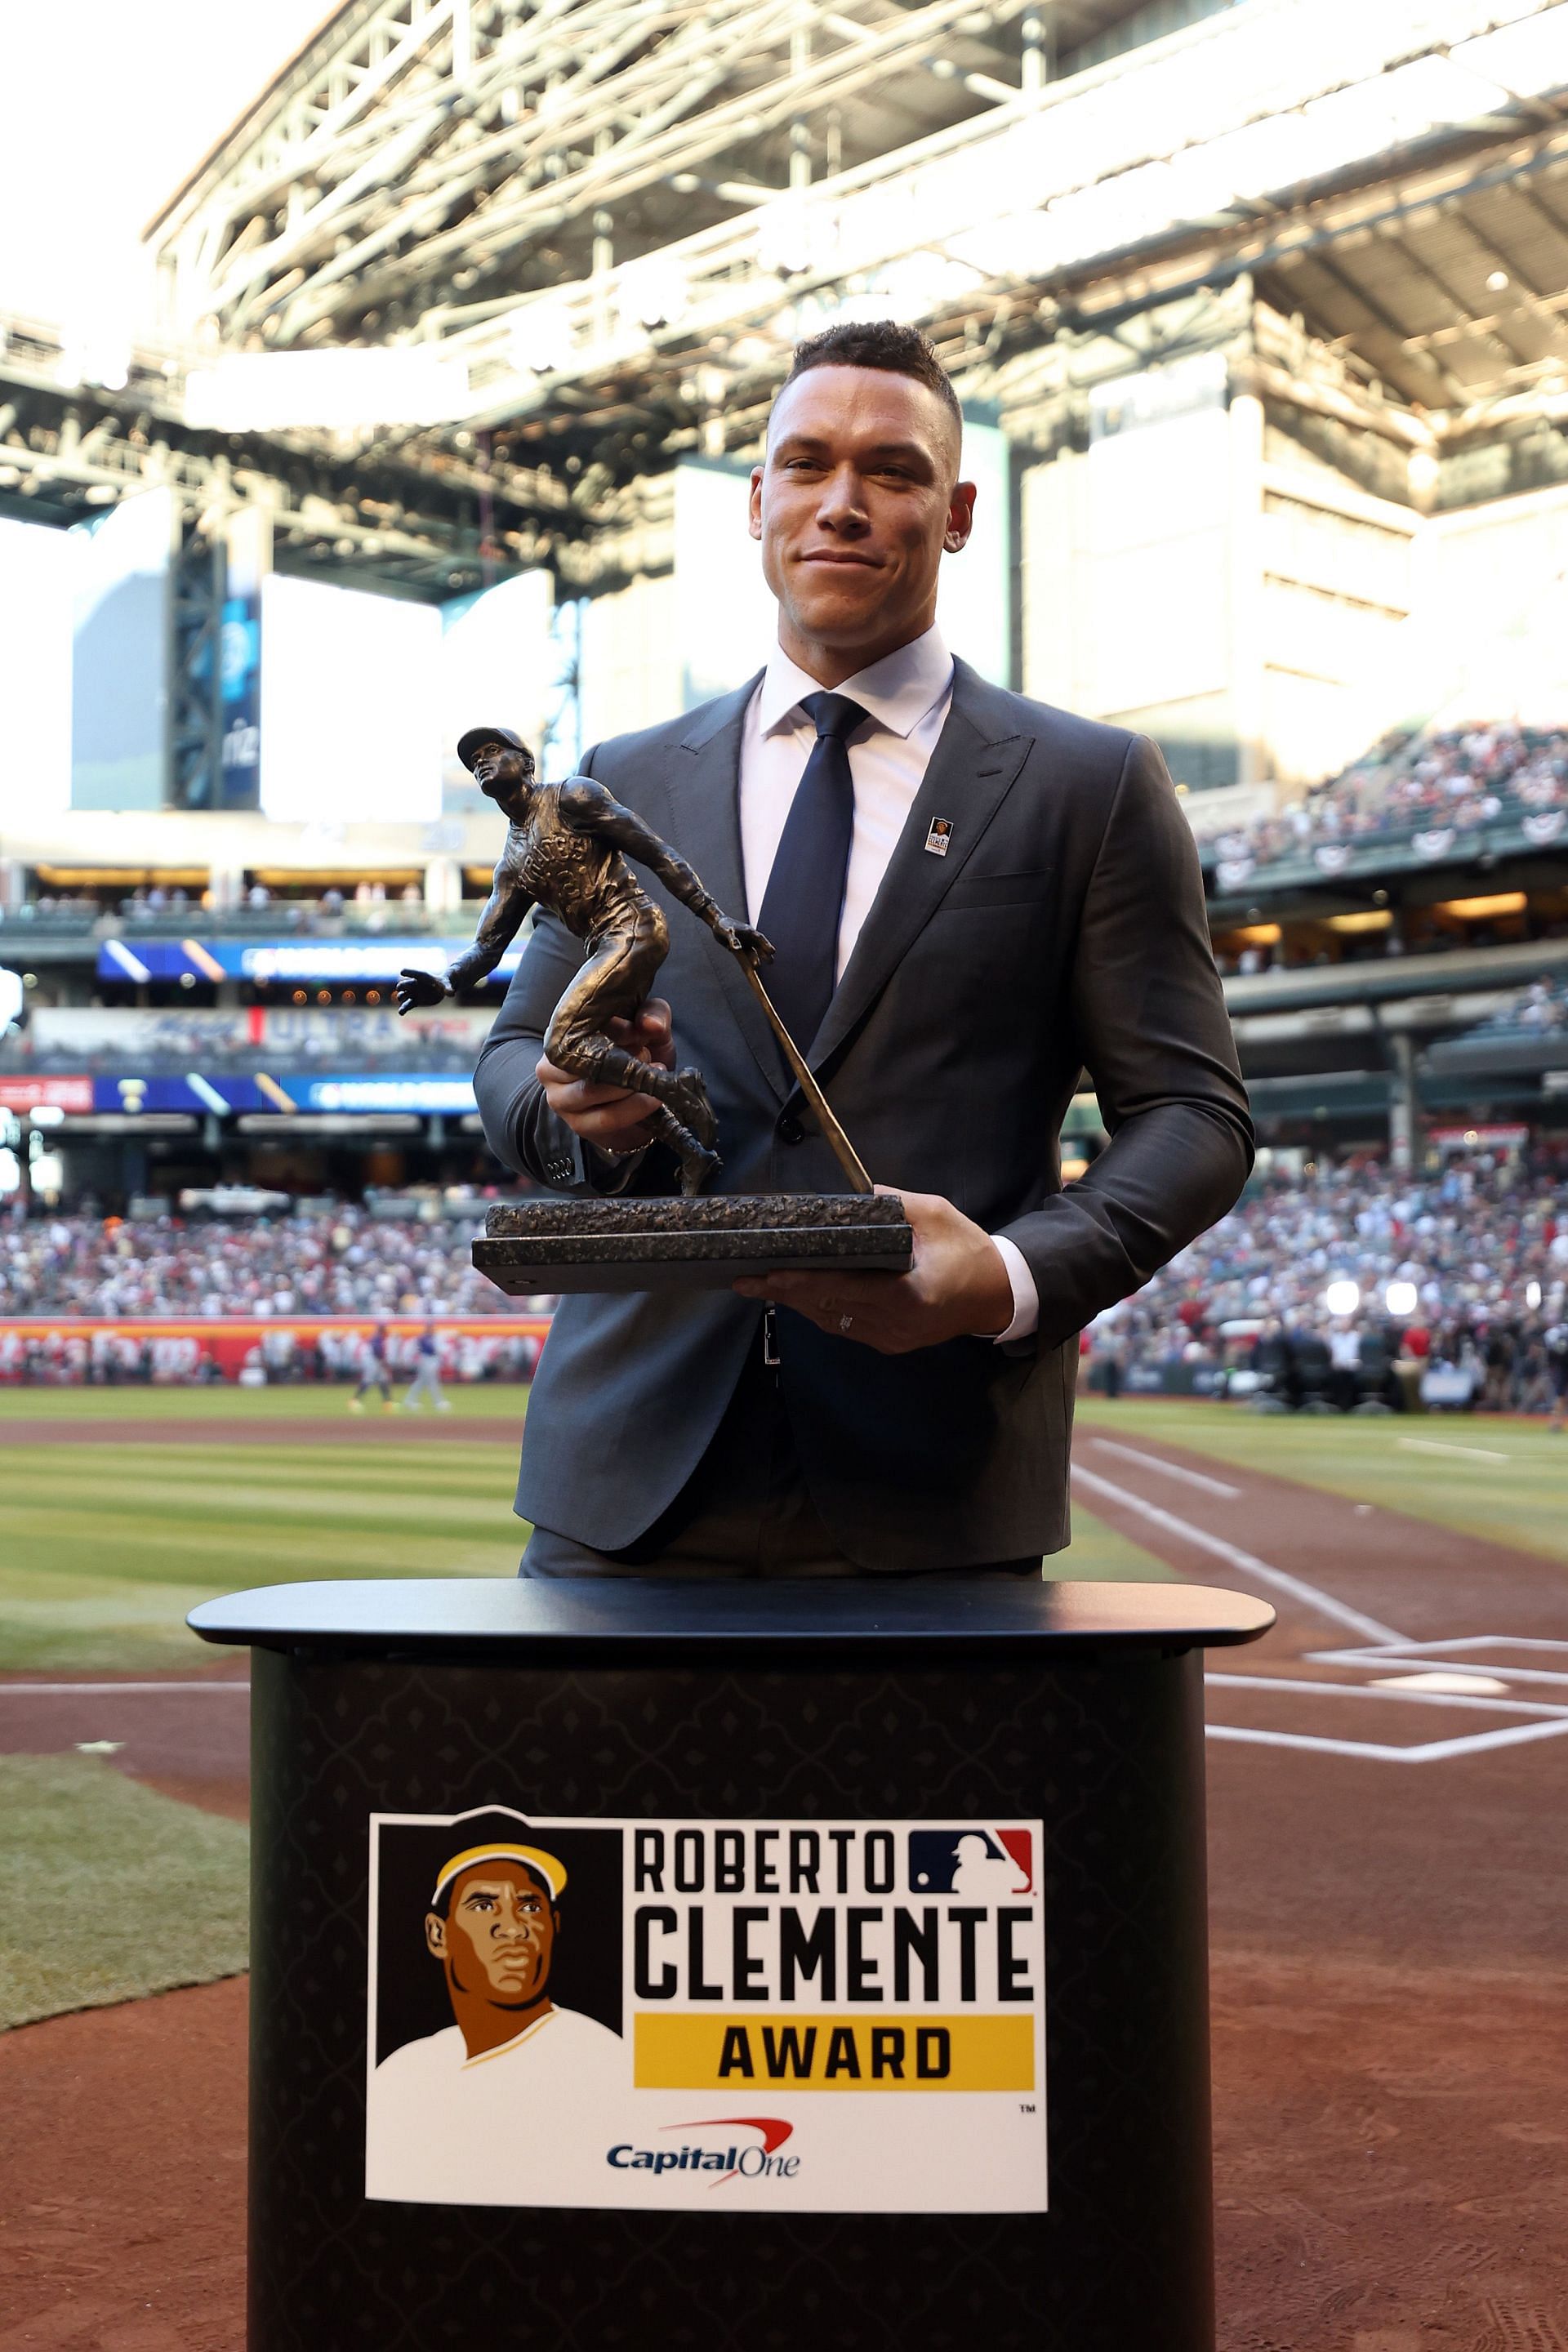 Aaron Judge recently received the Roberto Clemente Award for his contributions to society.